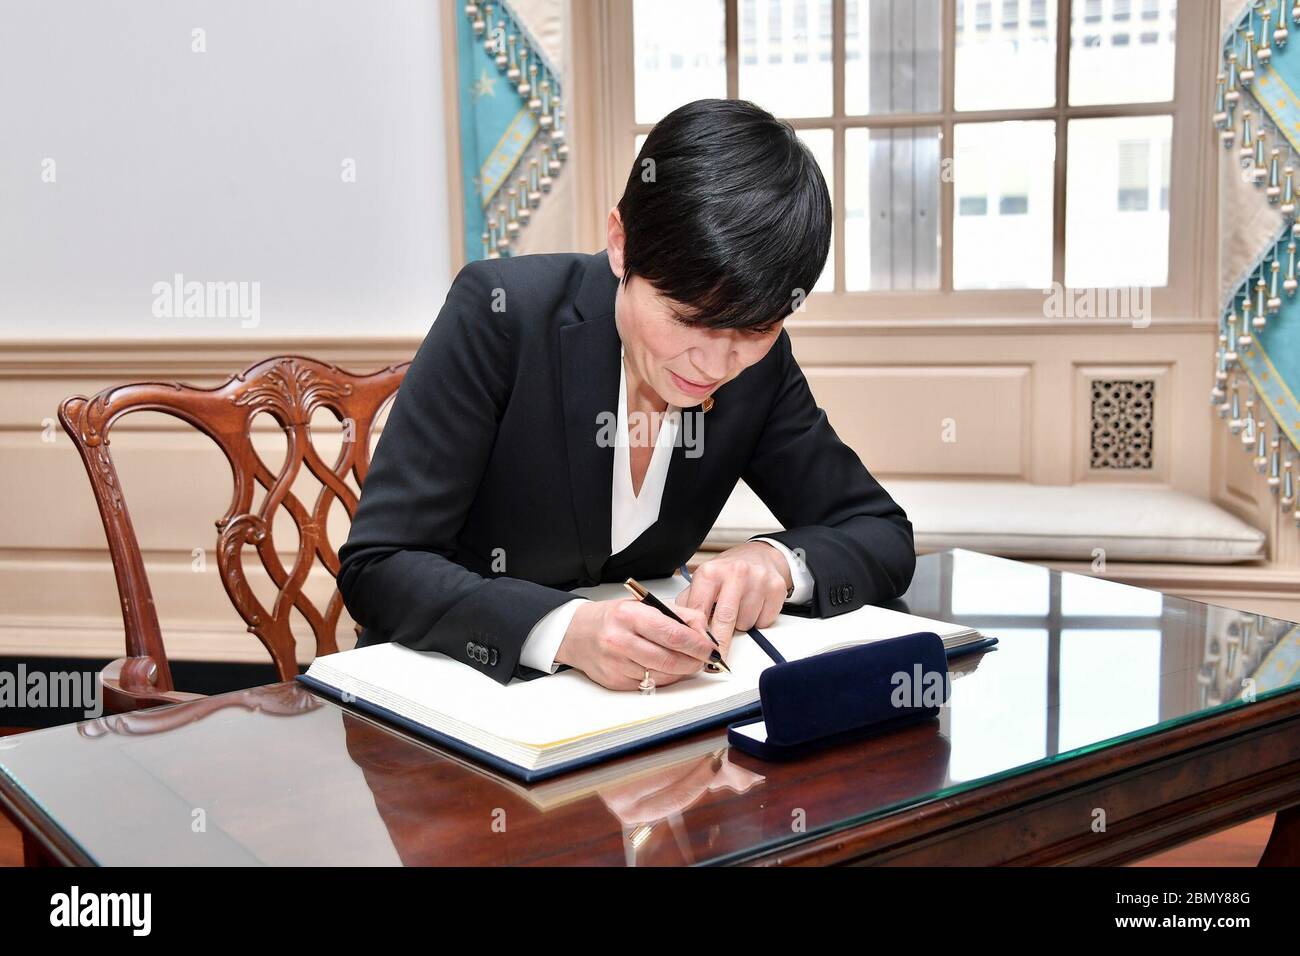 Norwegian Foreign Minister Soreide Signs Secretary Pompeo's Guestbook Norwegian Foreign Minister Ine Marie Eriksen Soreide signs U.S. Secretary of State Michael R. Pompeo's guestbook before their meeting at the U.S. Department of State in Washington, D.C. on December 19, 2018. Stock Photo